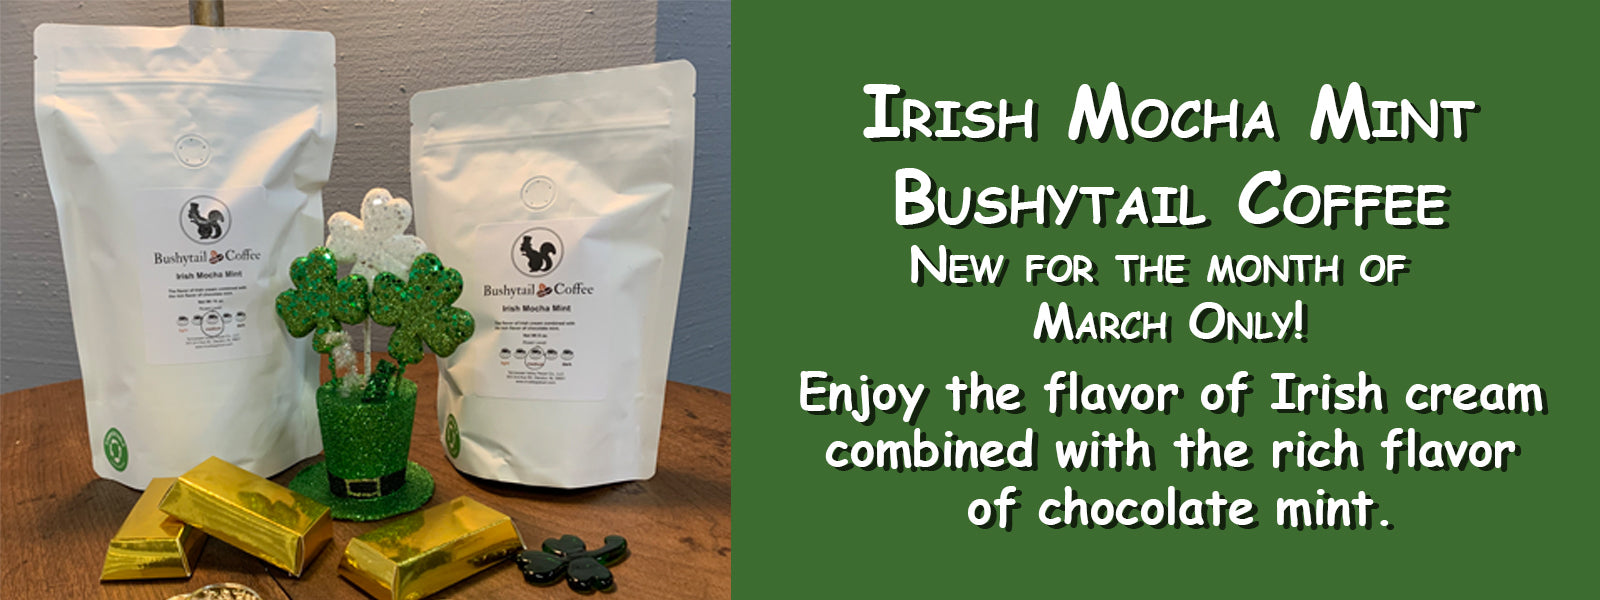 Irish Mocha Mint coffee is now at Tennessee Valley Pecan Company for the month of March only.